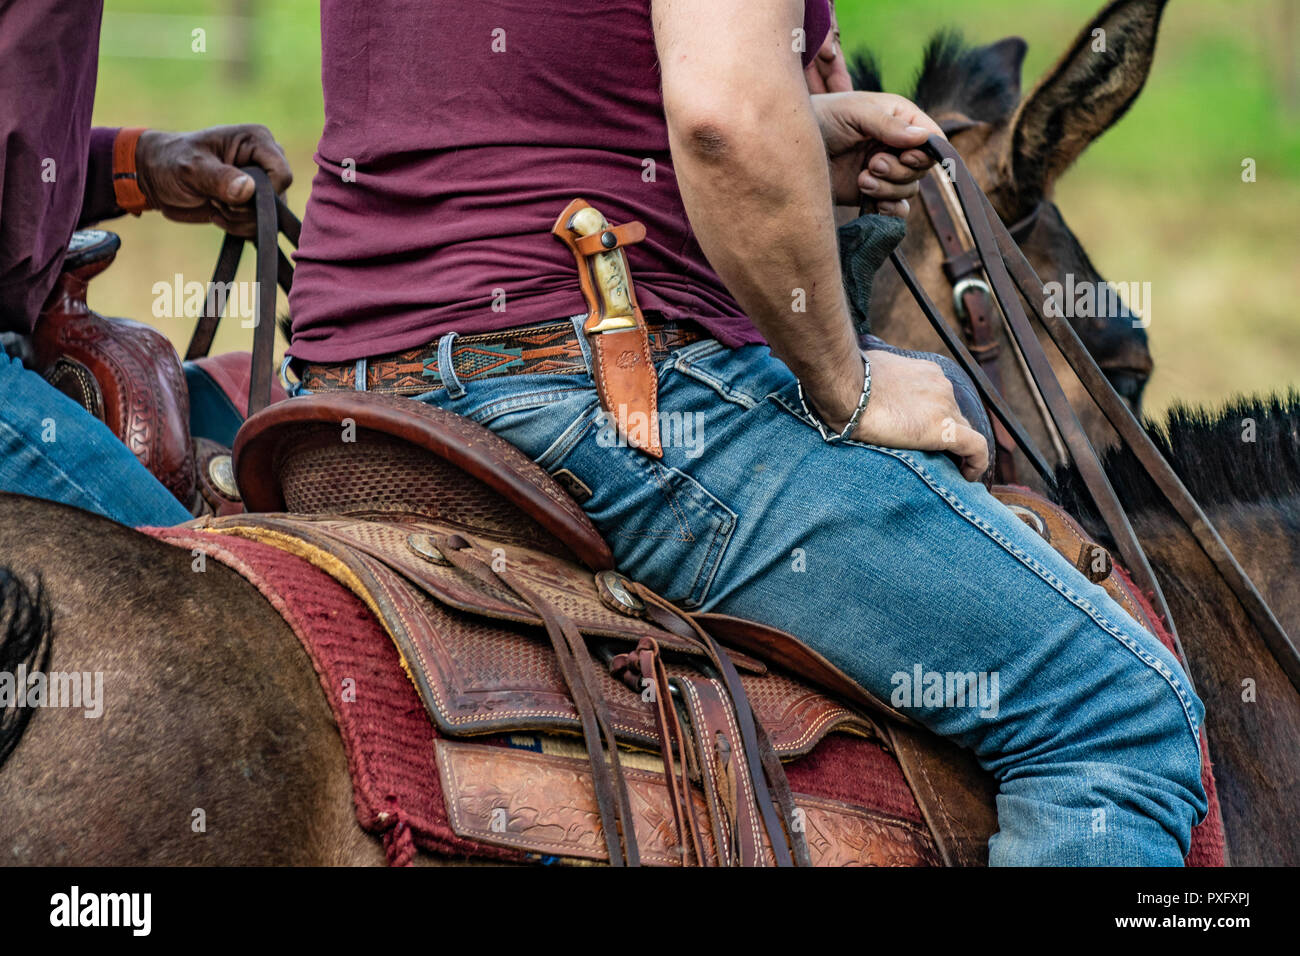 Horse rider with knife and blue jeans. Scenes from a rodeo and equestrian show, warming up phase, details of saddles, clothing, stirrups and brown hor Stock Photo